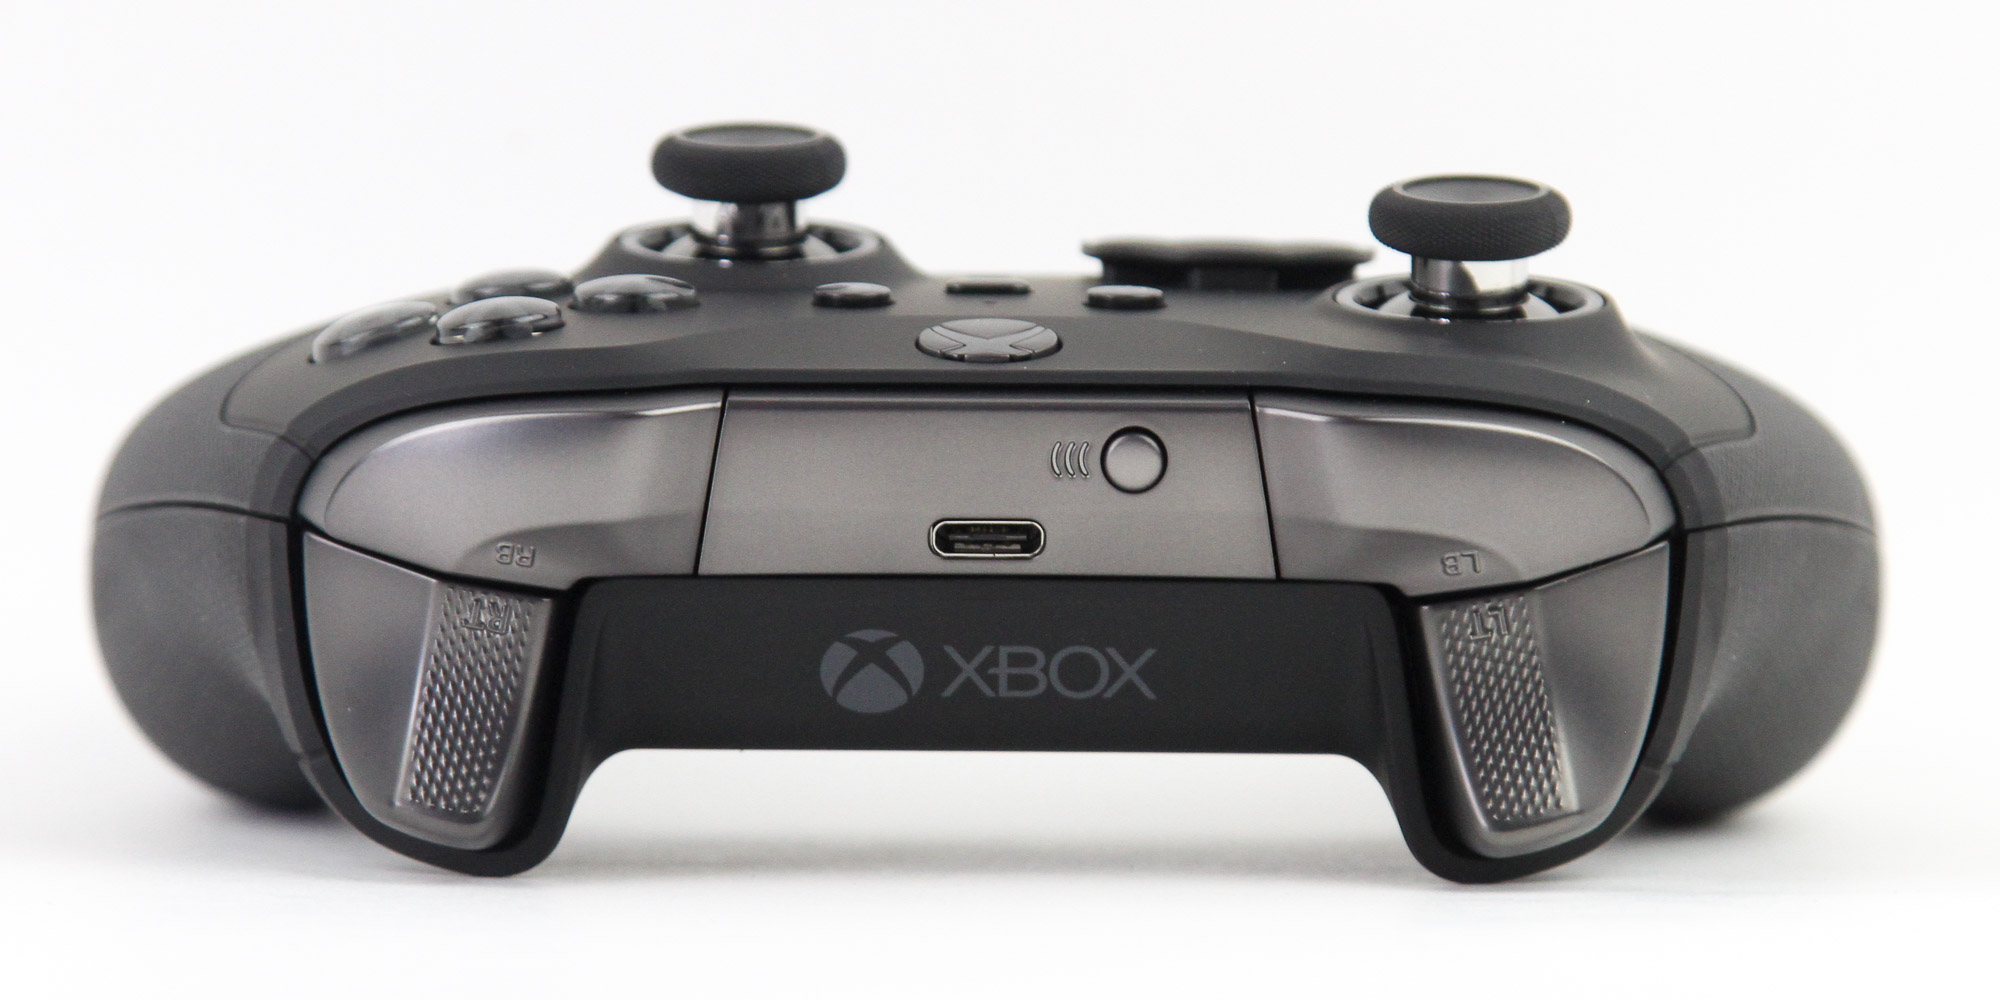 drivers for xbox one liquid metal controller